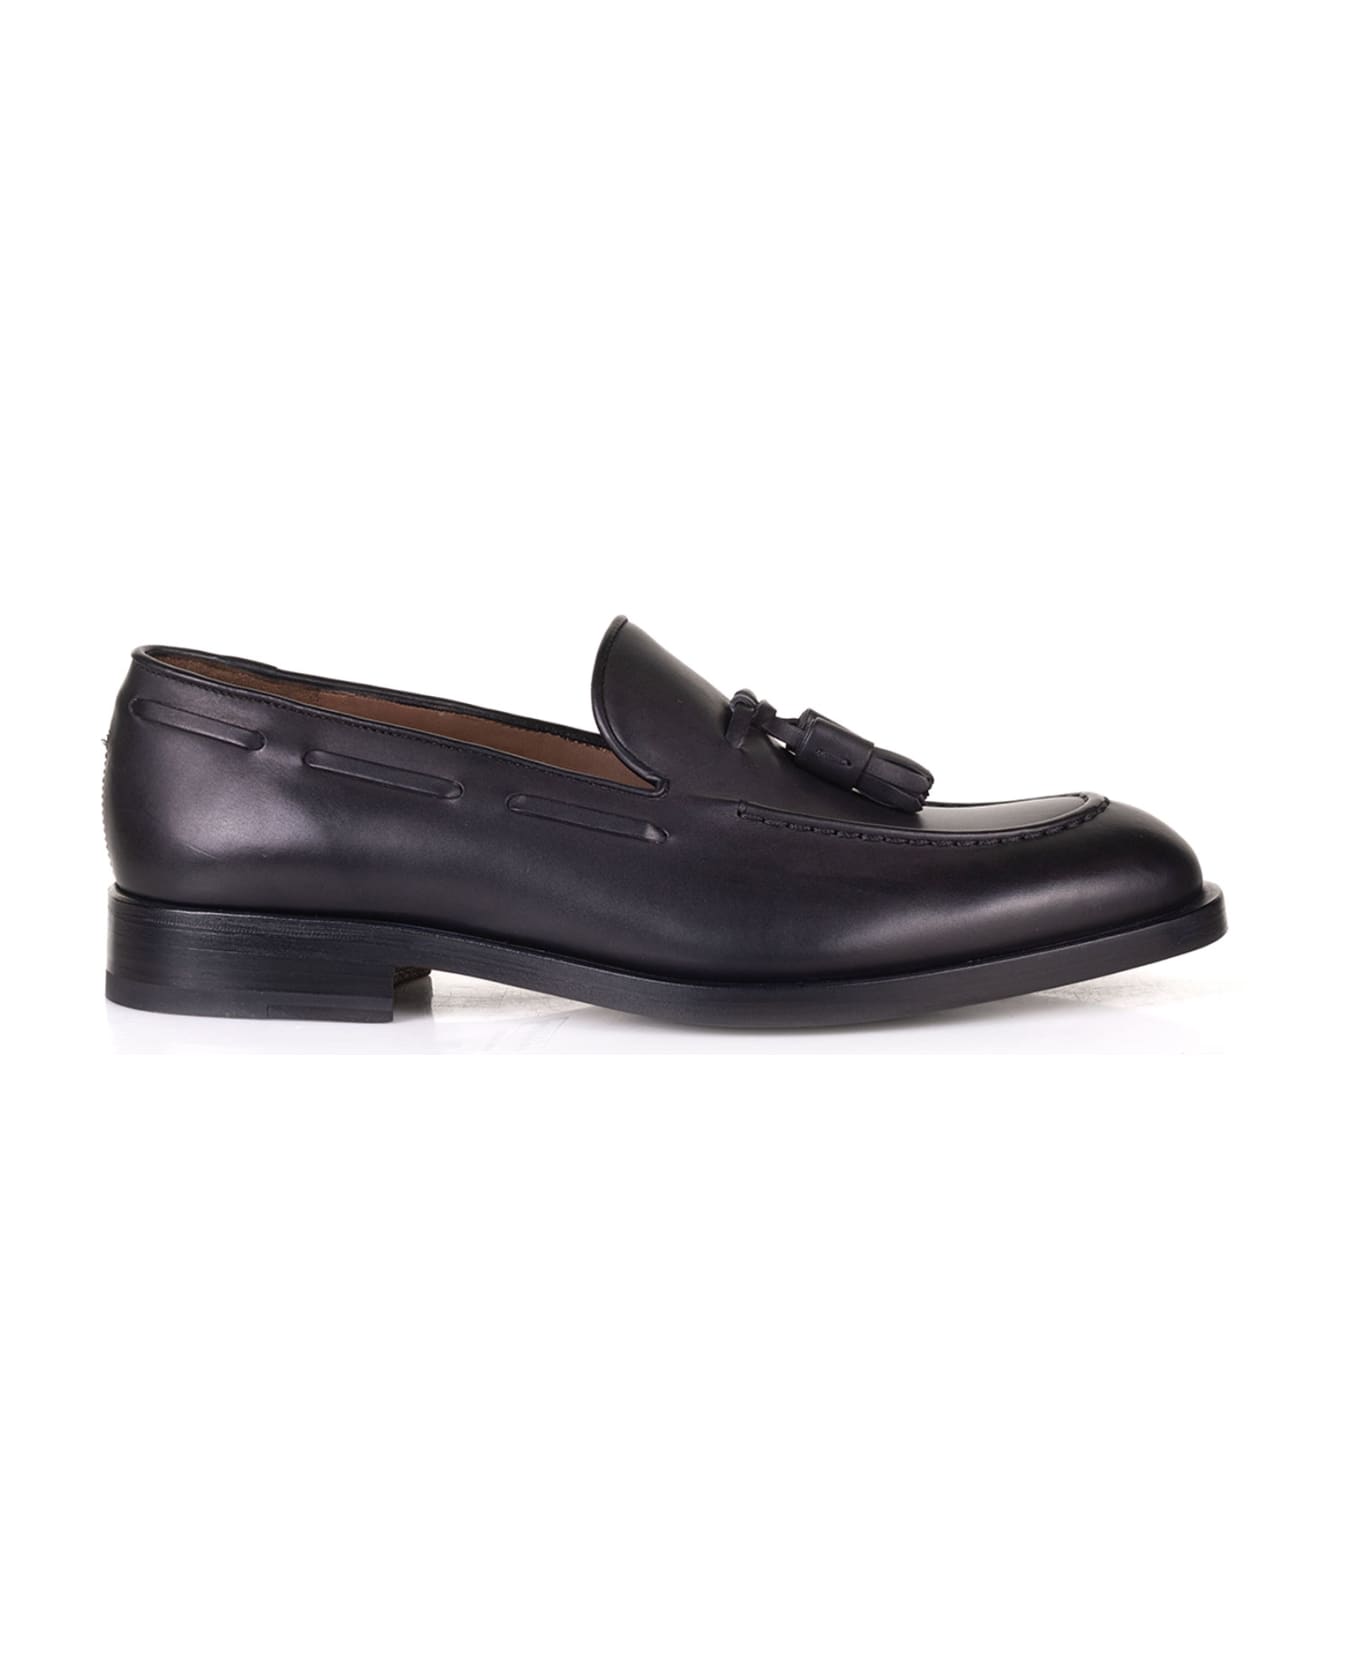 Fratelli Rossetti Leather Loafers With Tassels - NERO